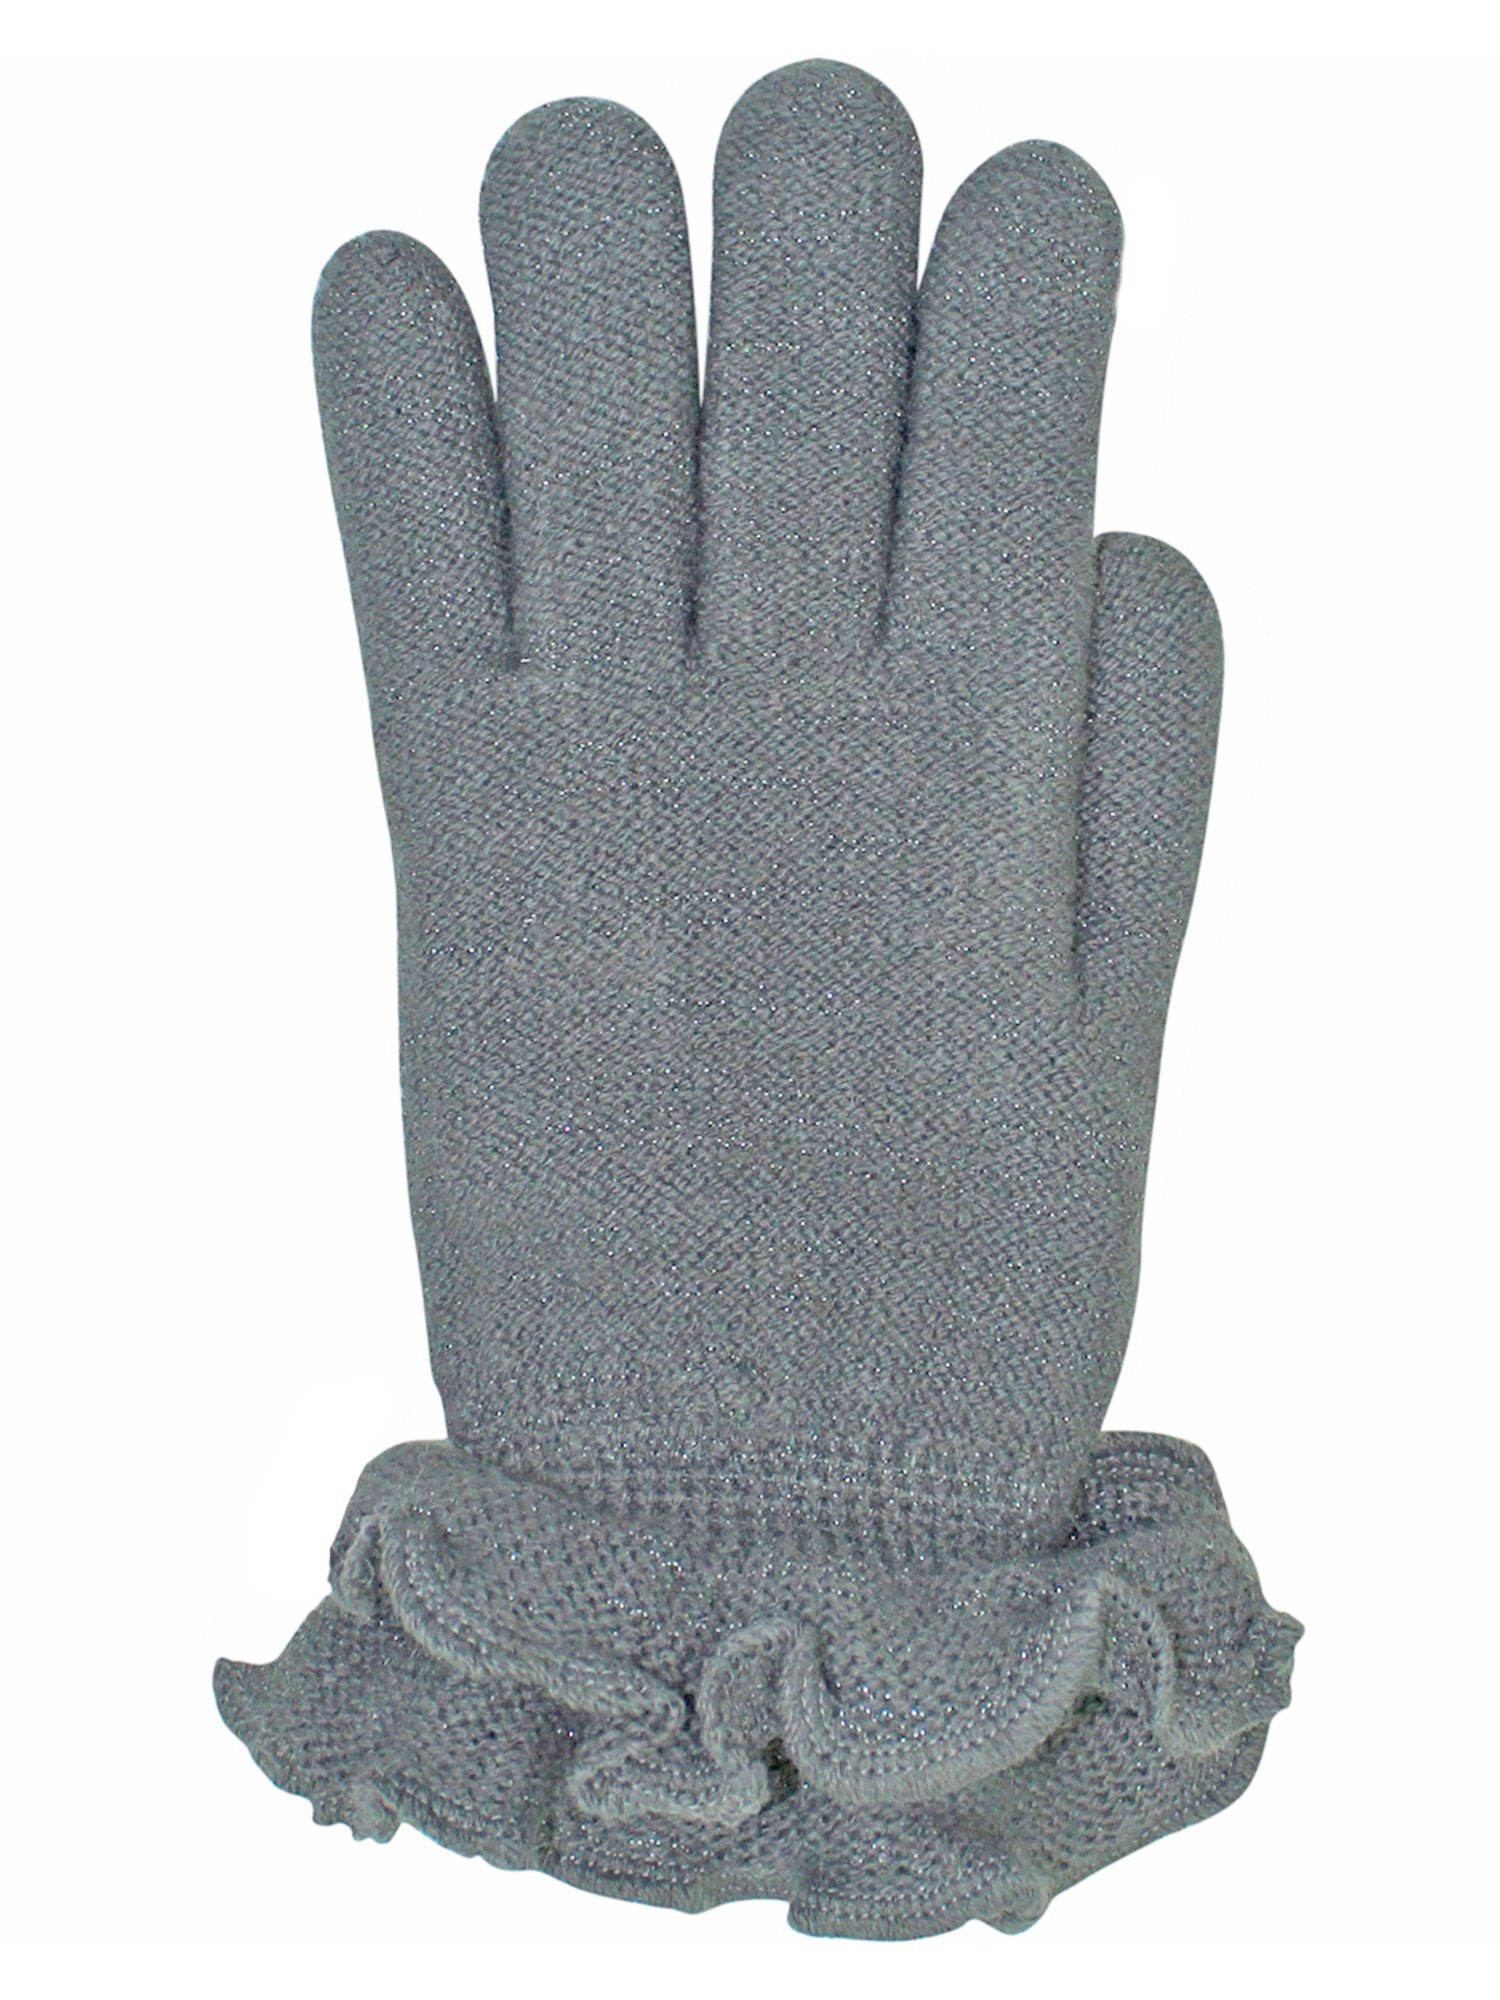 Gray Double Layer Knit Gloves With Ruffle Trim